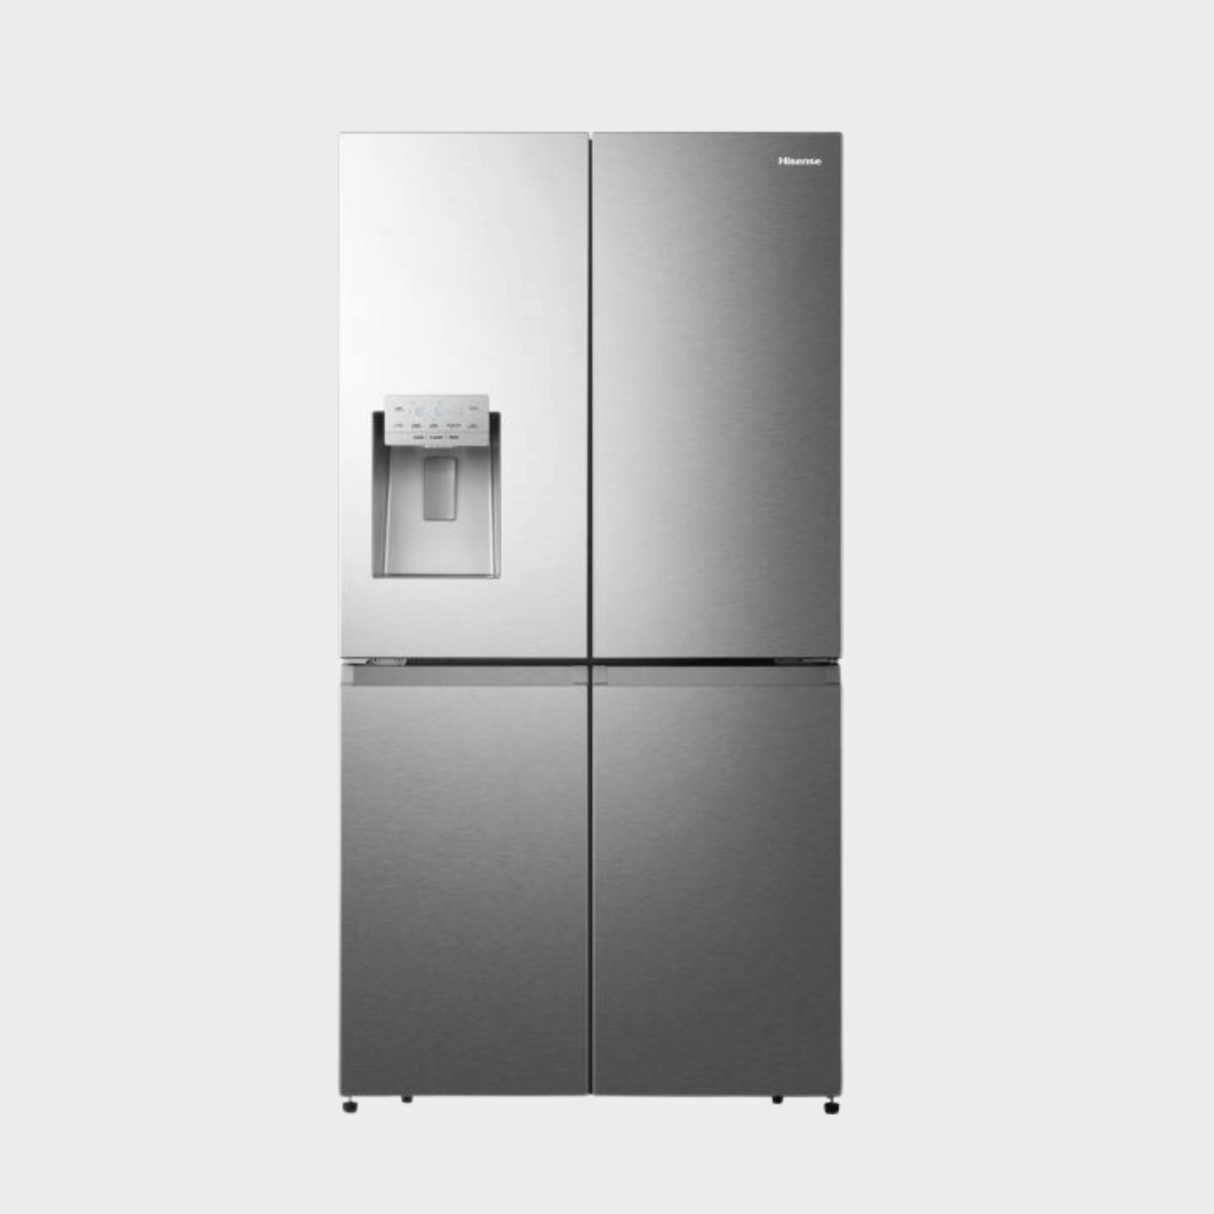 Hisense 720L 2-Door Side-by-Side Refrigerator with Water Dispenser and Ice Maker, WiFi Connectivity, RC-72WS4SA